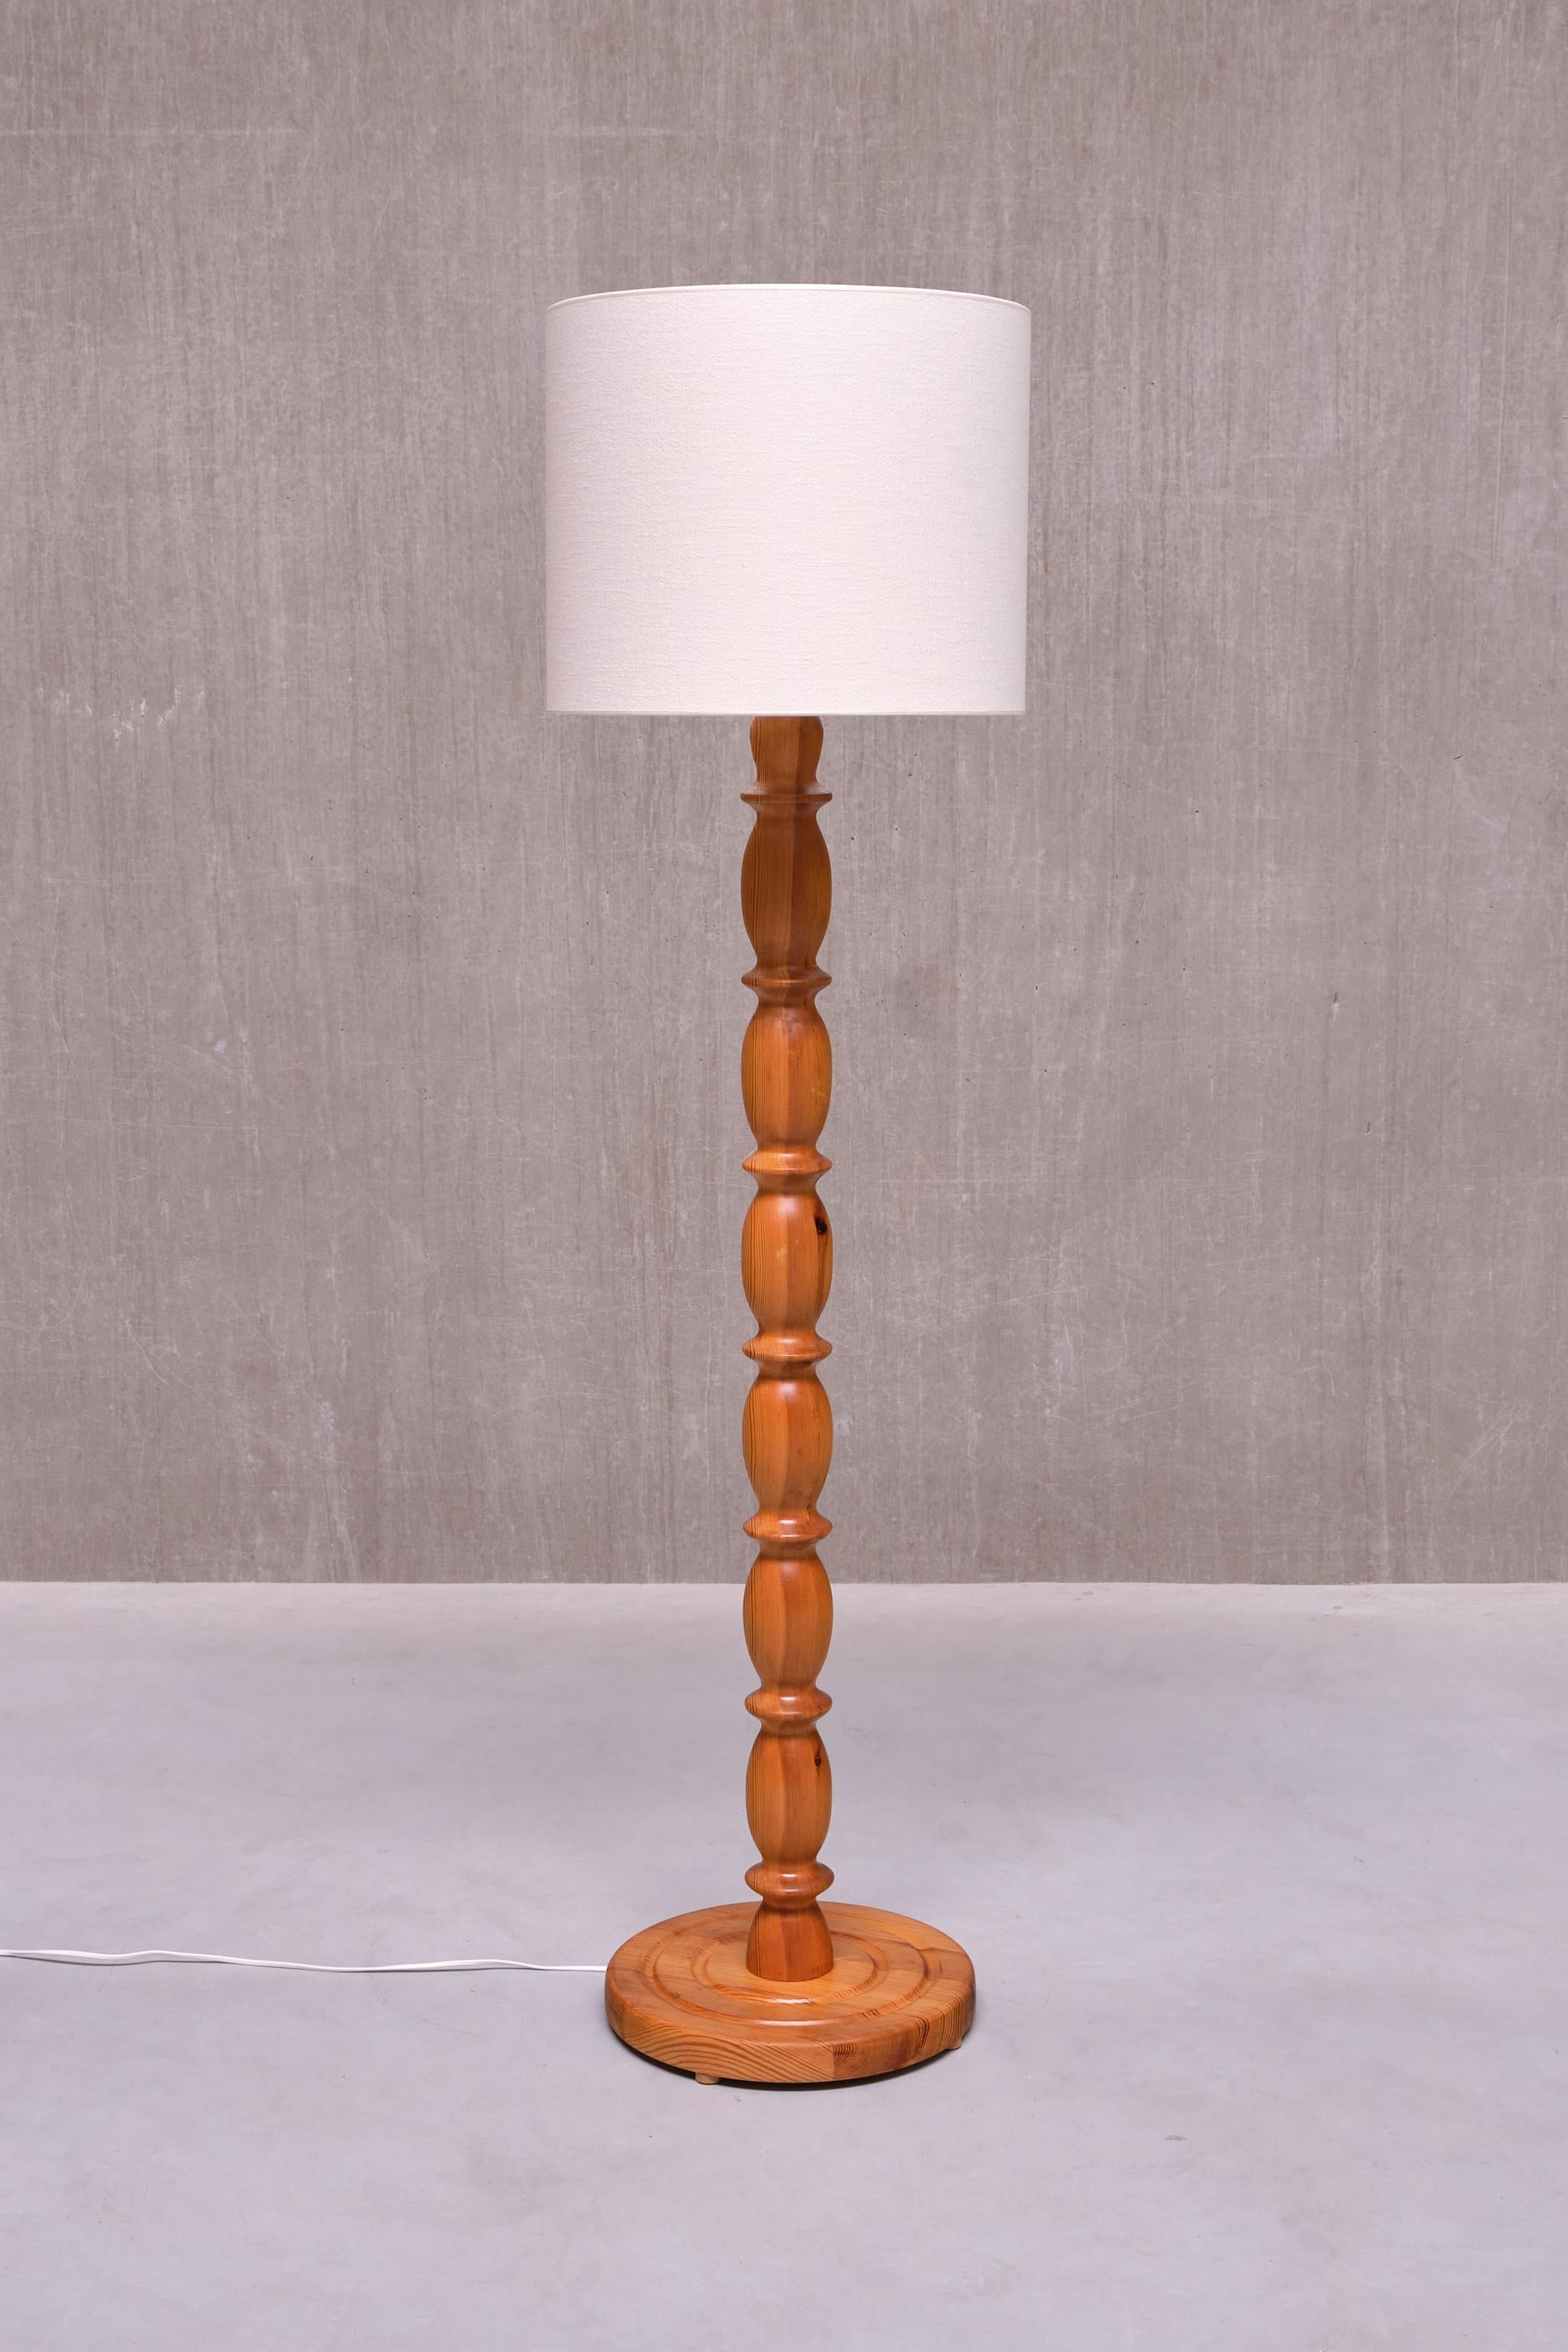 Swedish Modern Floor Lamp in Carved Solid Pine Wood, 1960s For Sale 7